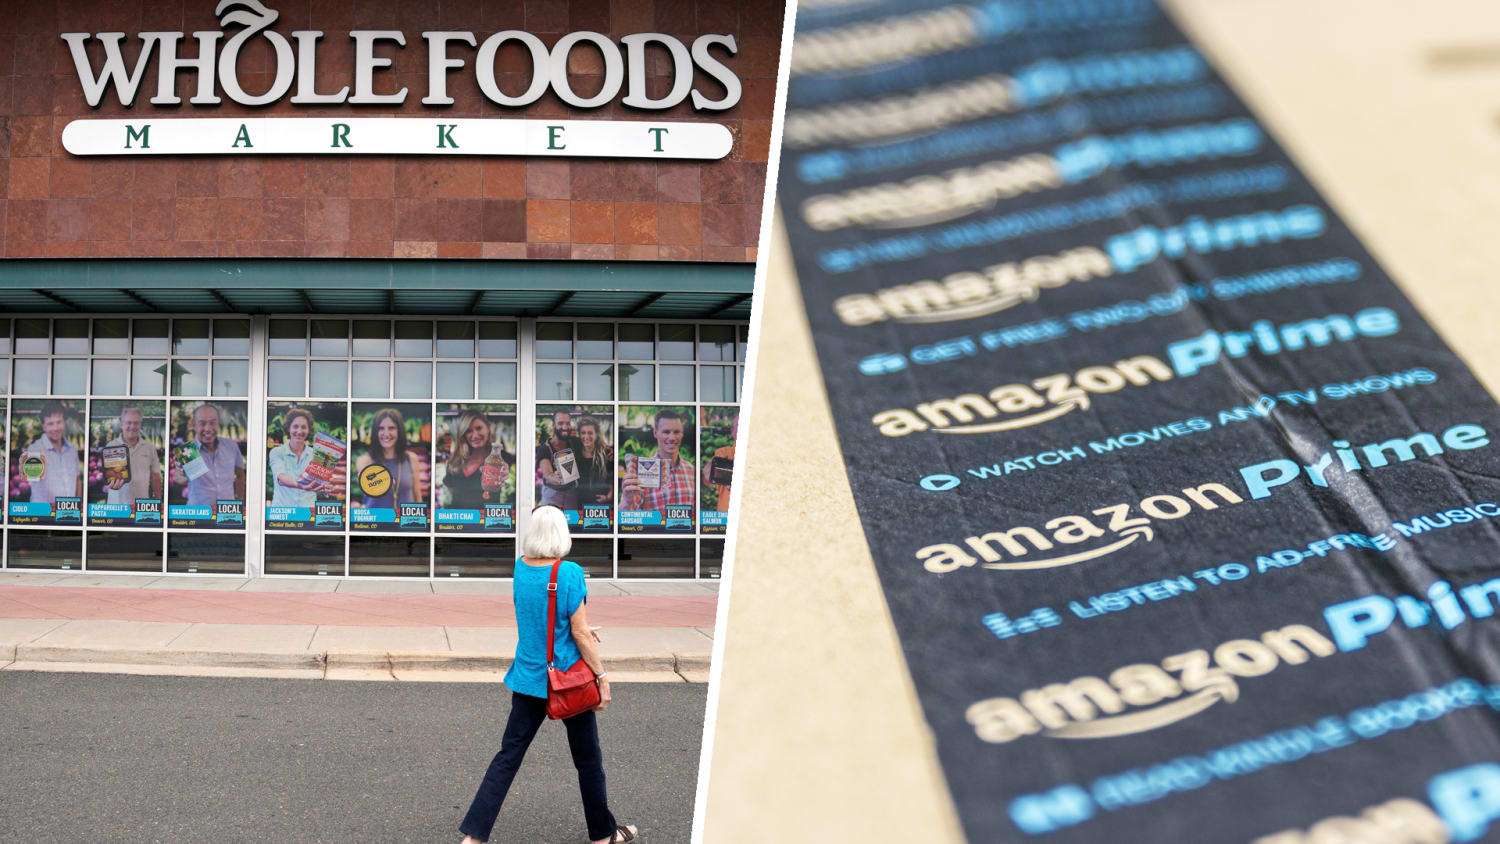 Amazon Prime members will get Whole Foods discounts ...